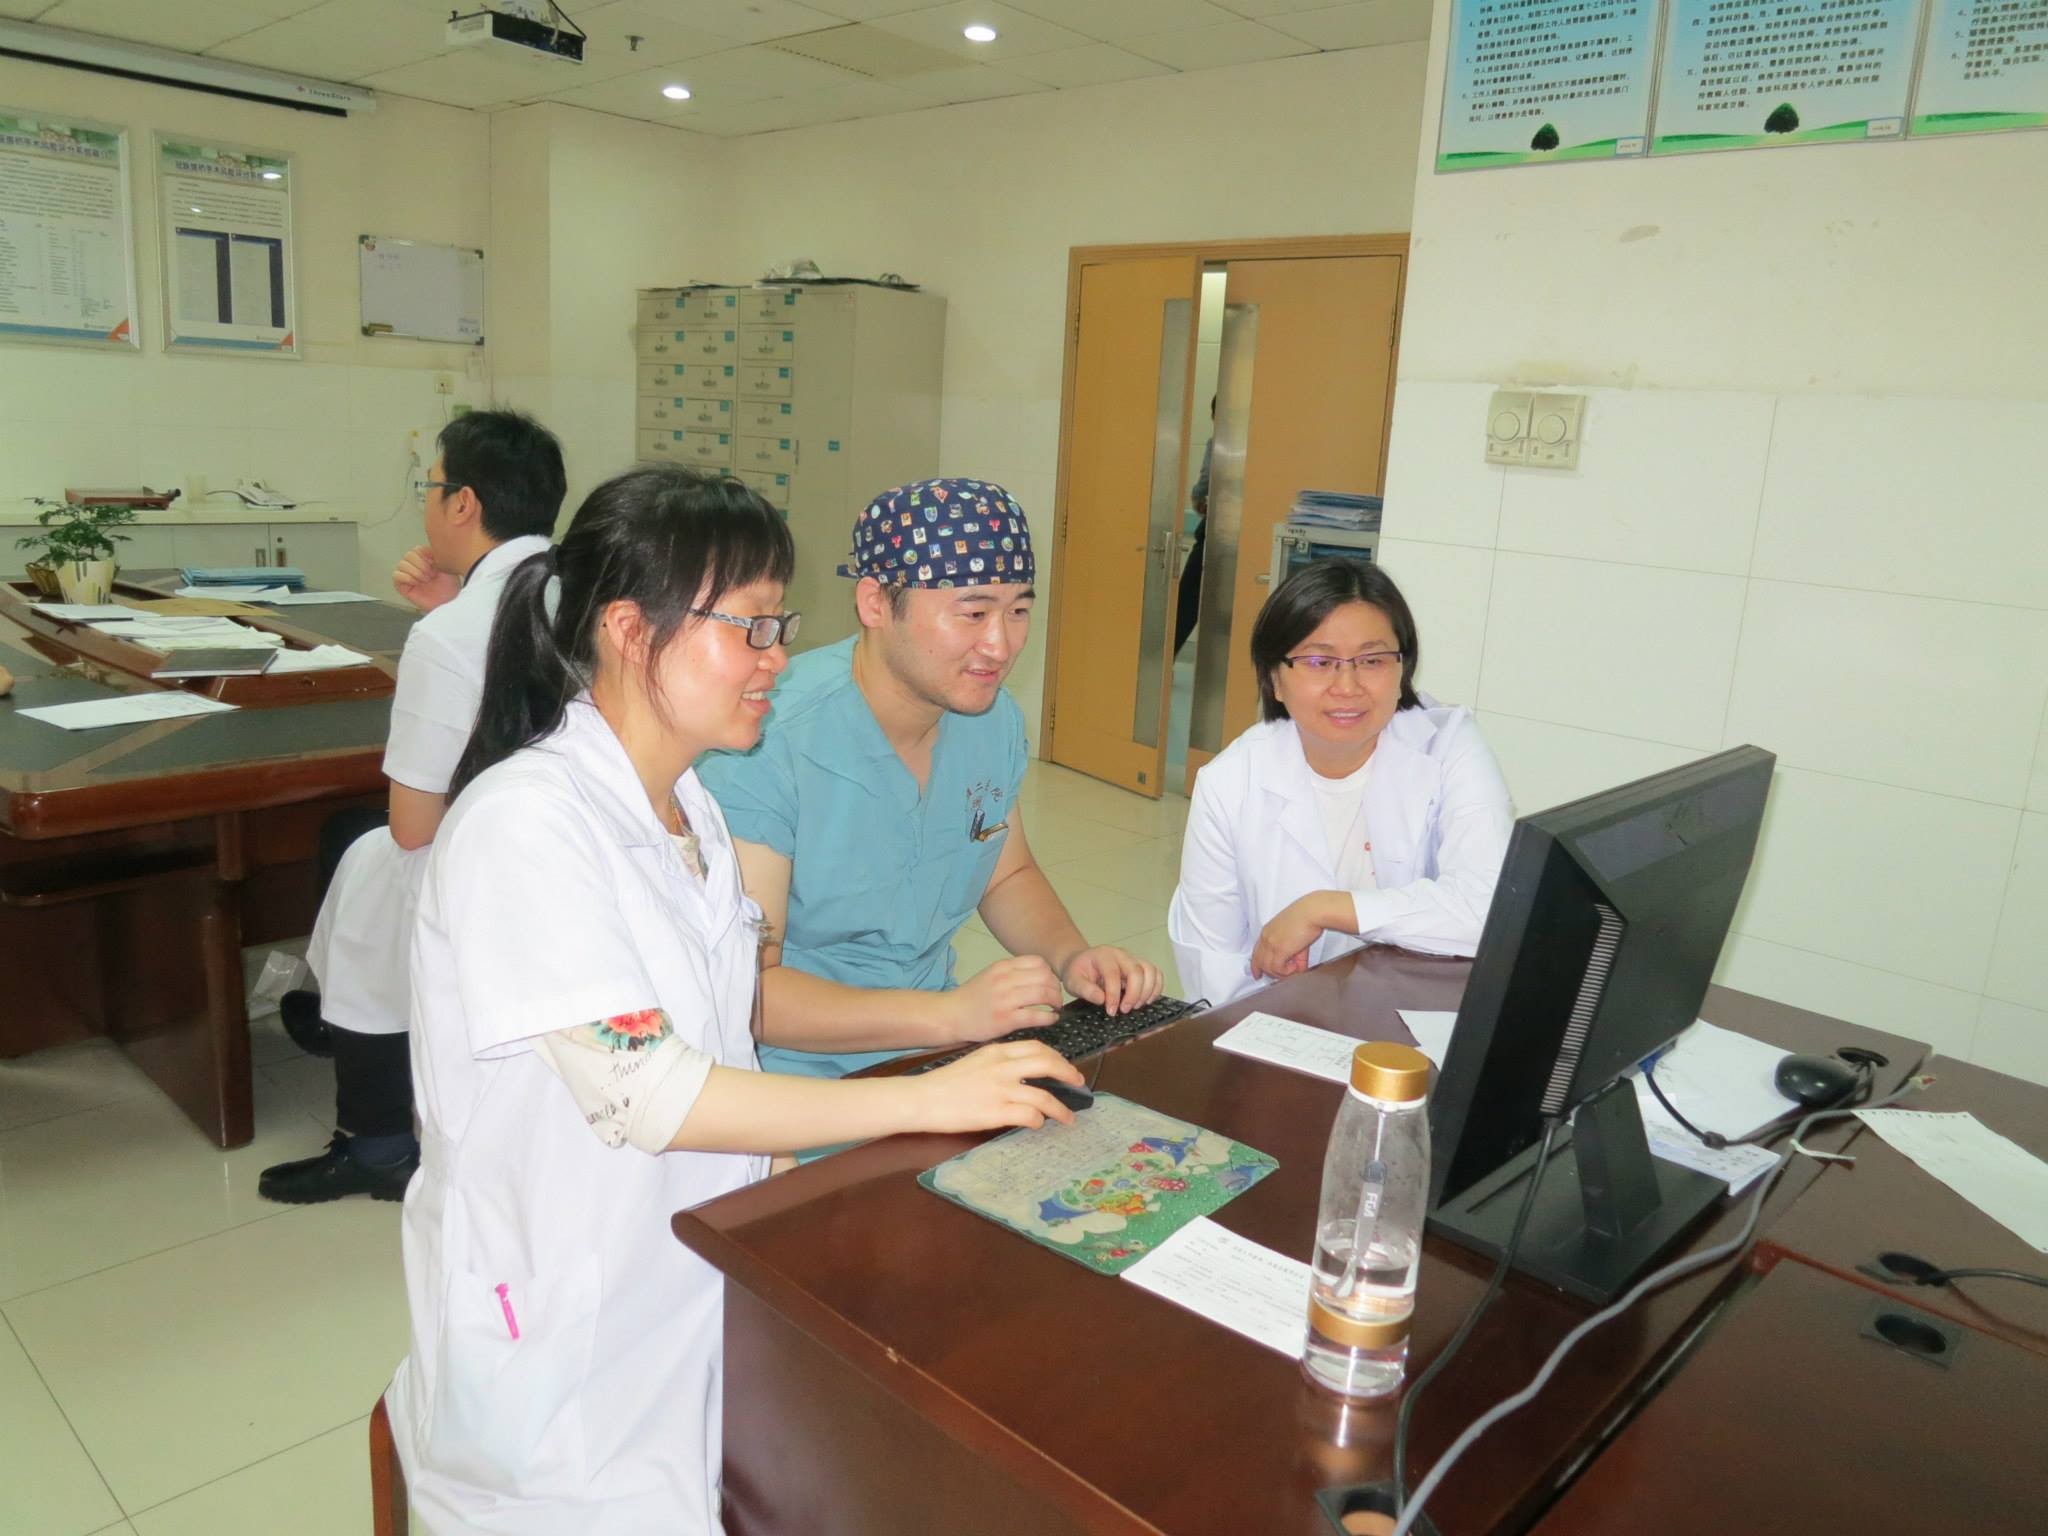 Hoan Linh Banh trains pharmacists in China